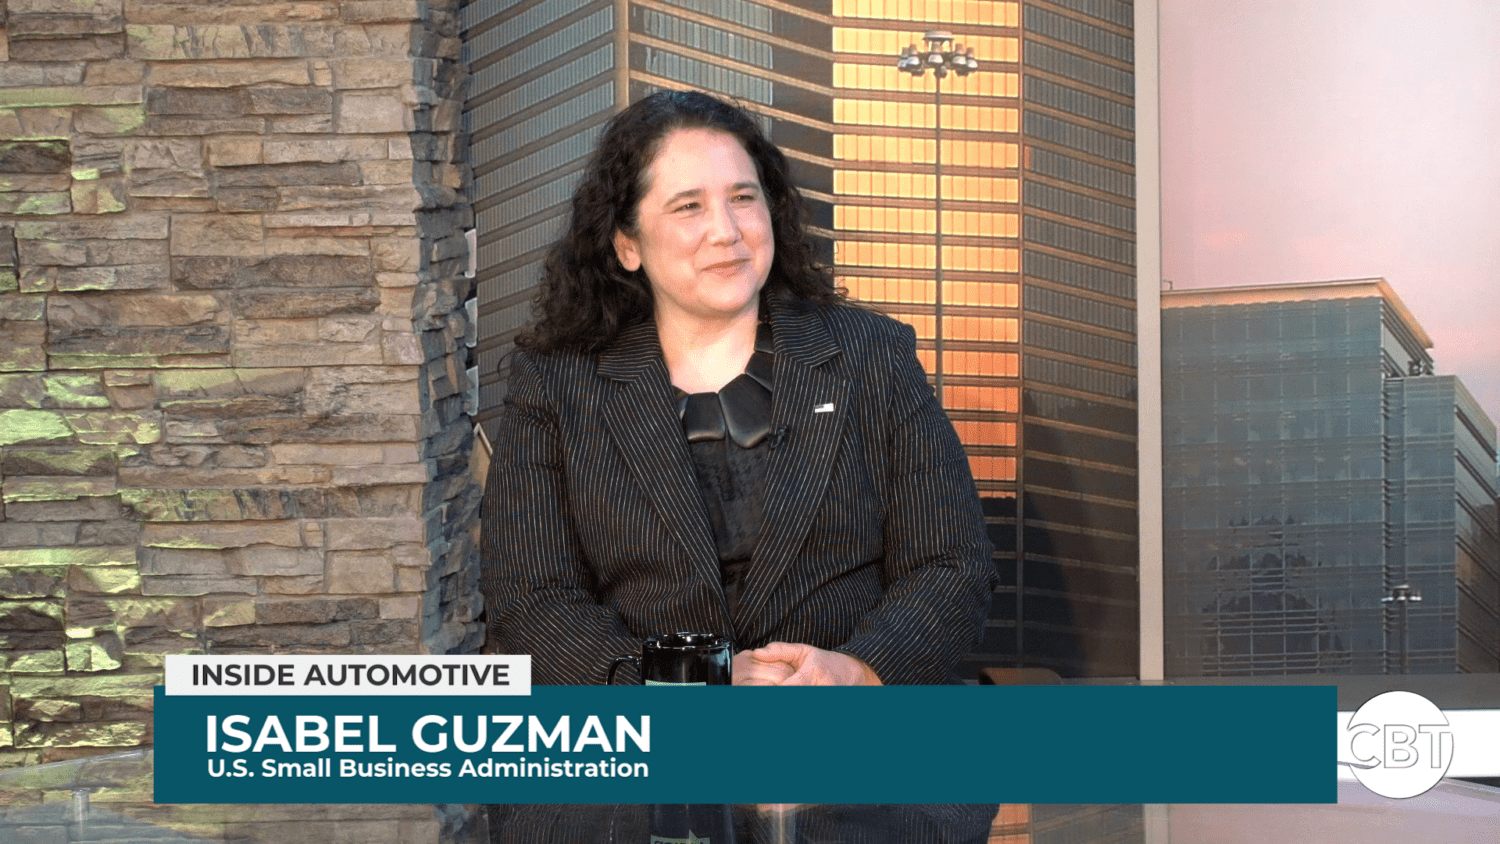 Isabel Casillas Guzman joins Inside Automotive to discuss the critical role the SBA plays in creating opportunities for entrepreneurs.